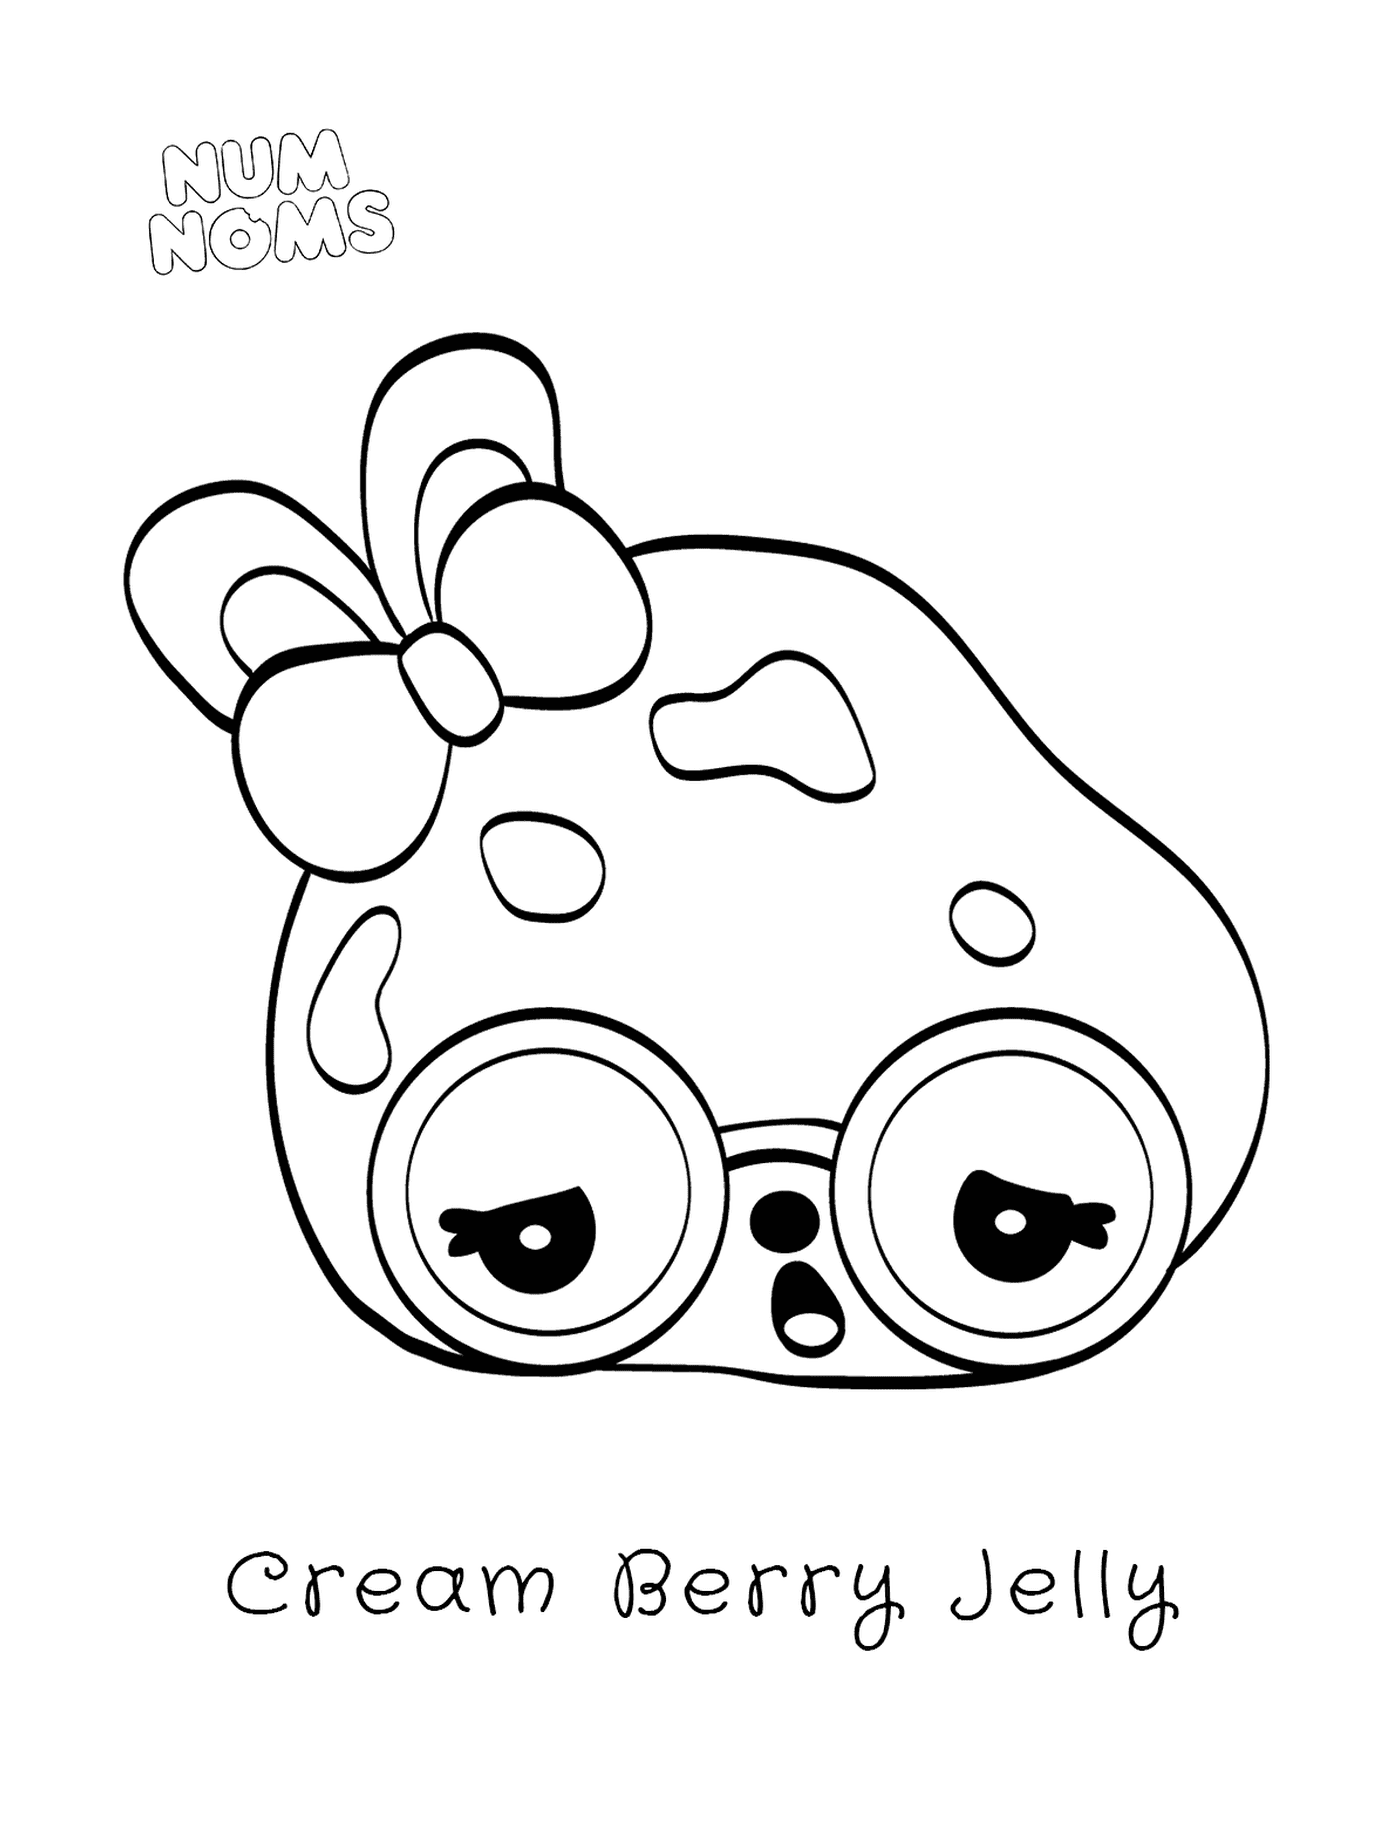  Jelly berry cream, a surprise 